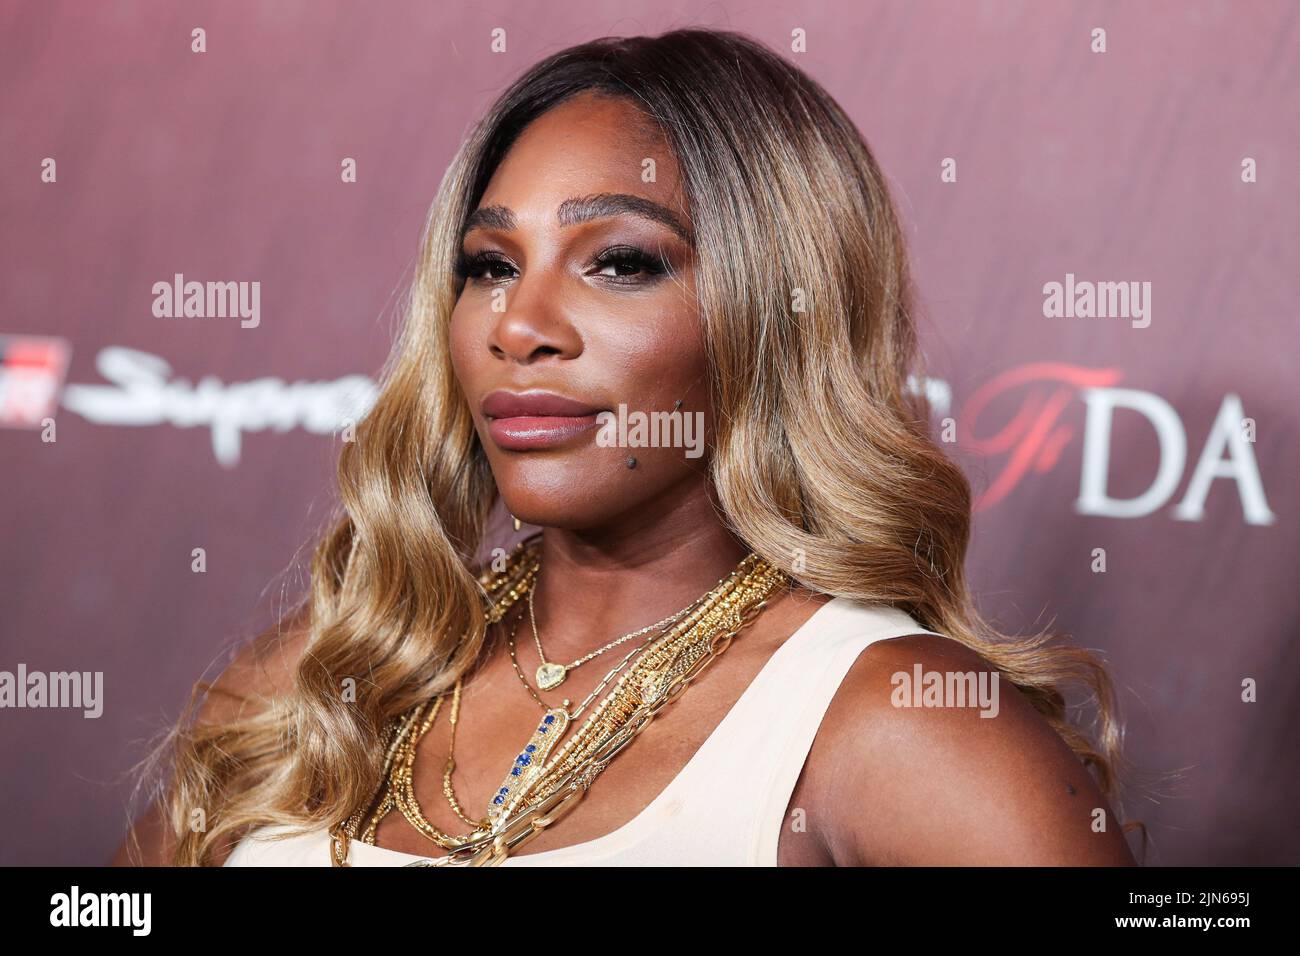 Hollywood, United States. 09th Aug, 2022. (FILE) Serena Williams Says She Will Retire From Tennis After U.S. Open. HOLLYWOOD, LOS ANGELES, CALIFORNIA, USA - JULY 18: American tennis player Serena Williams arrives at the Sports Illustrated Fashionable 50 held at Sunset Room Hollywood on July 18, 2019 in Hollywood, Los Angeles, California, United States. (Photo by Xavier Collin/Image Press Agency) Credit: Image Press Agency/Alamy Live News Stock Photo